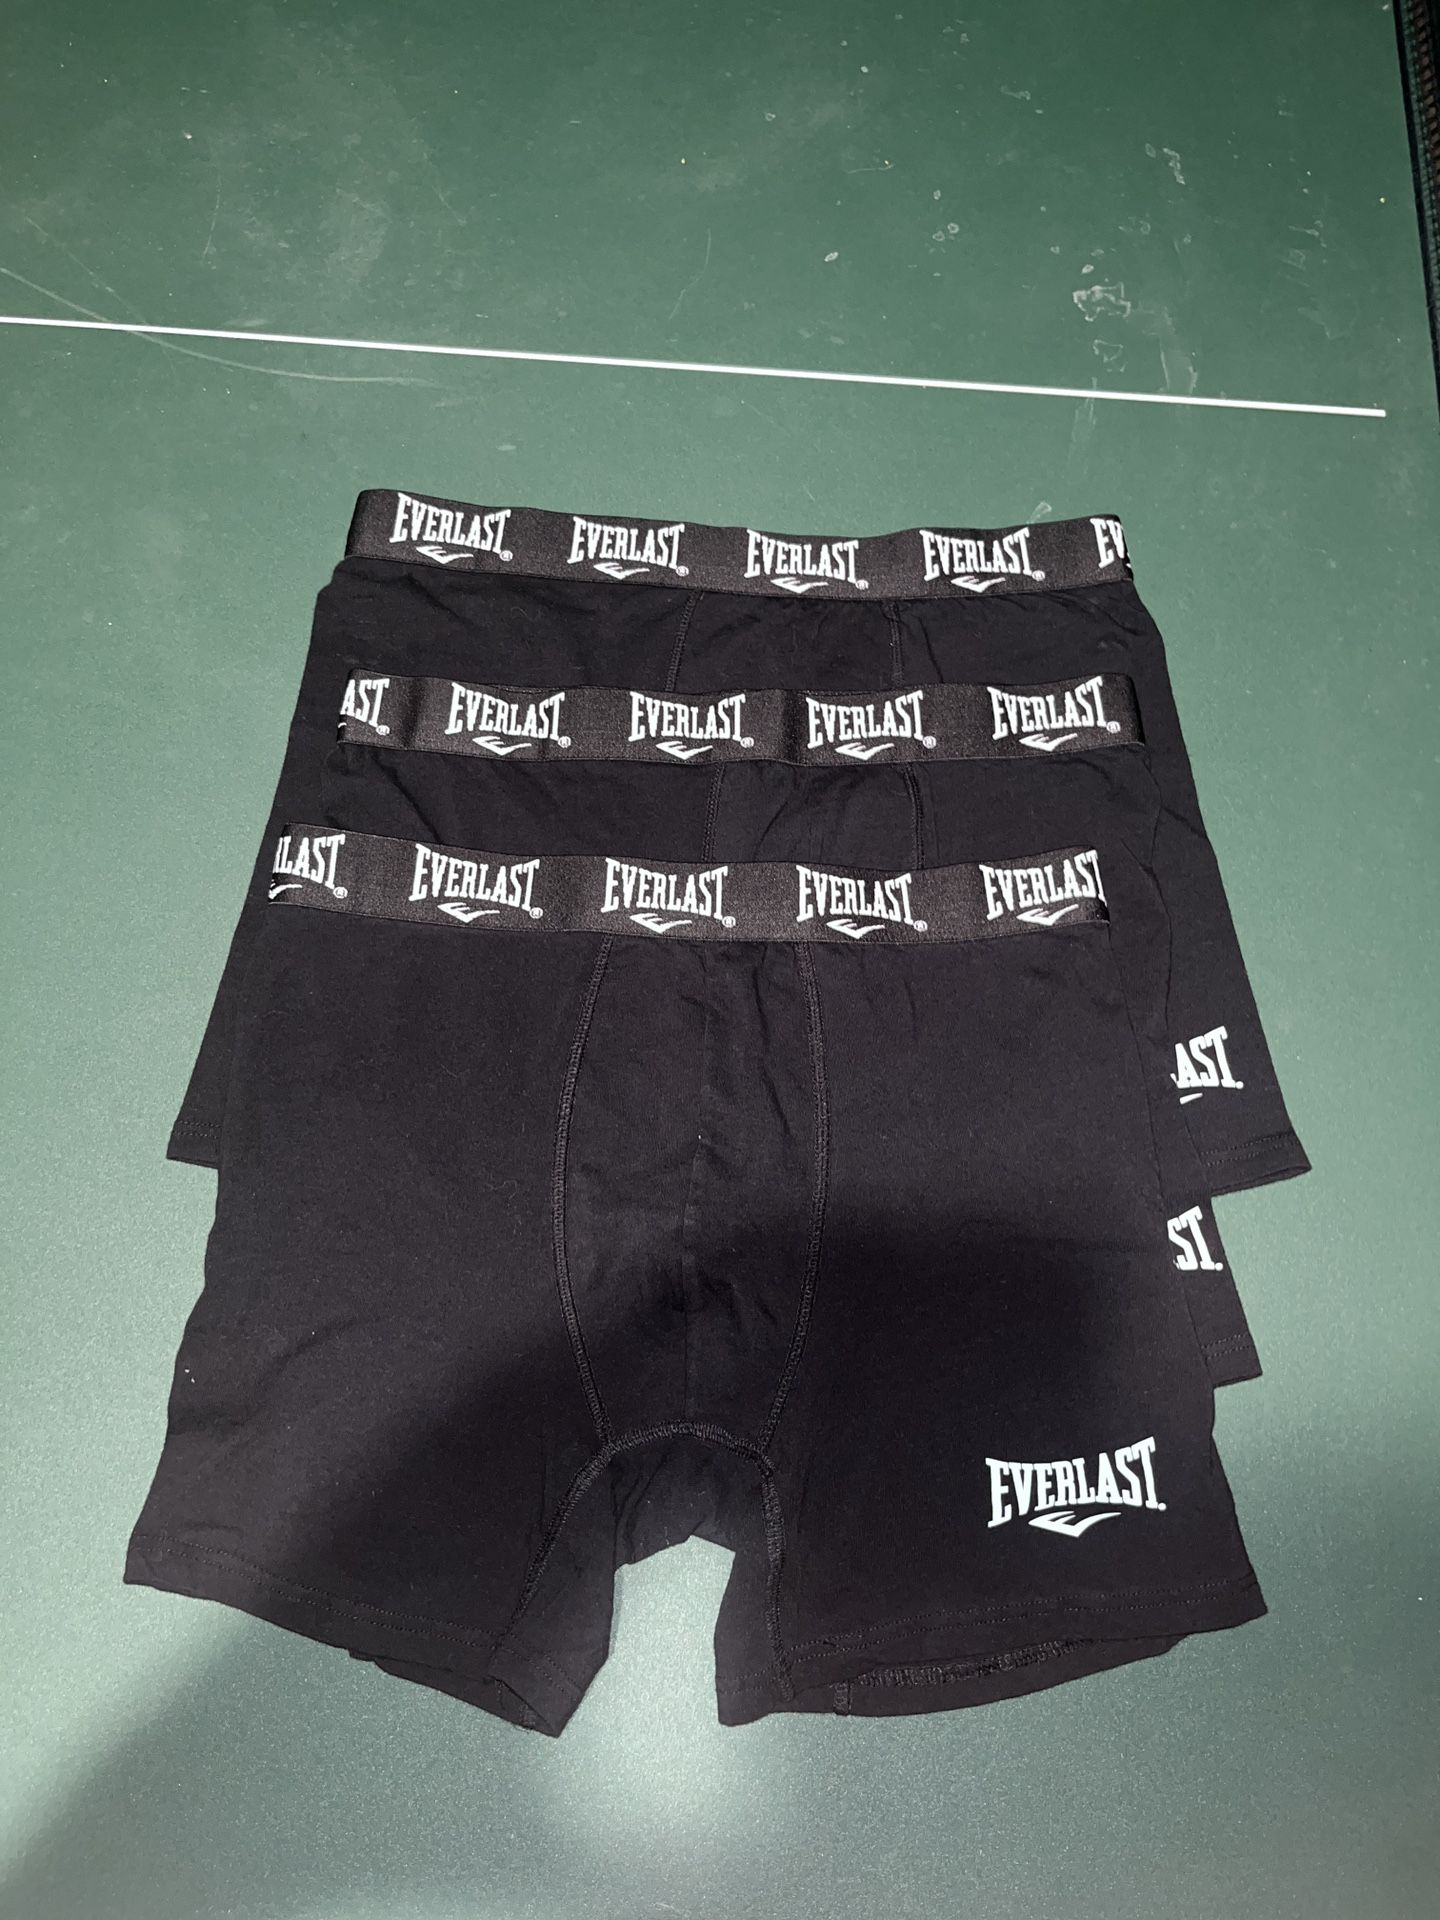 Ultimate Comfort and Value: Like New 3 Pack of Everlast Boxer